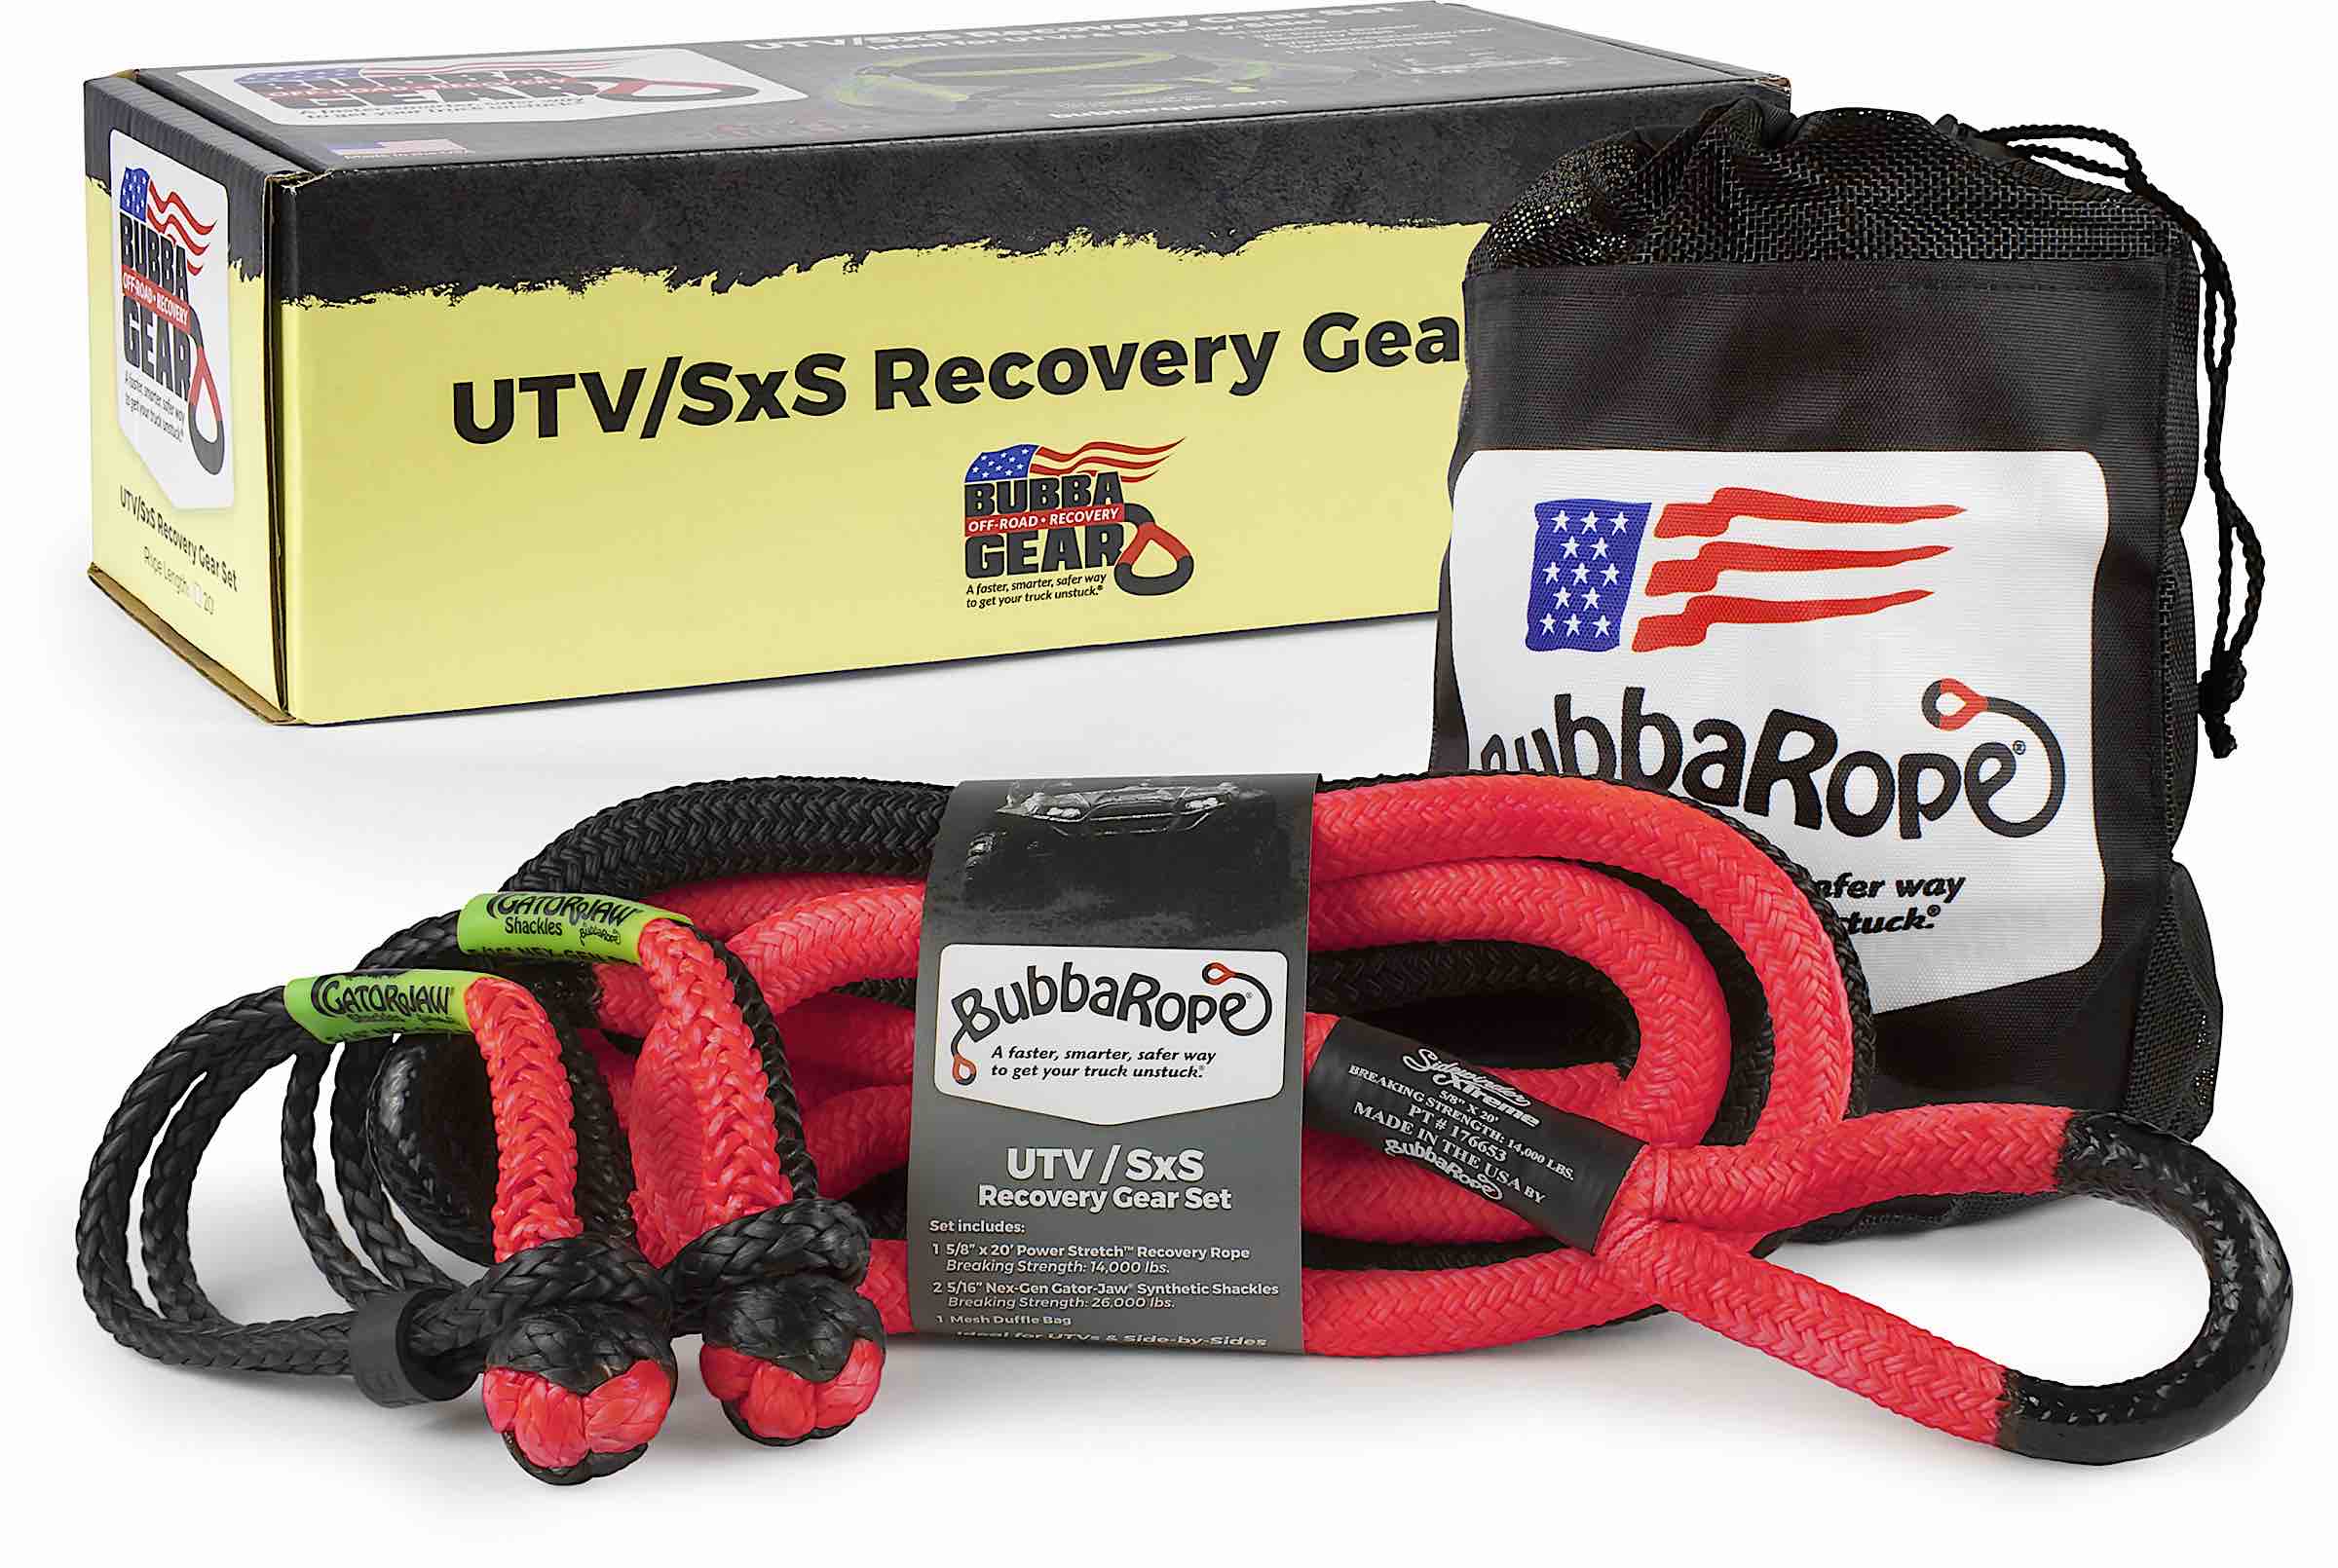 Bubba Rope Launches American-Made Gear Sets